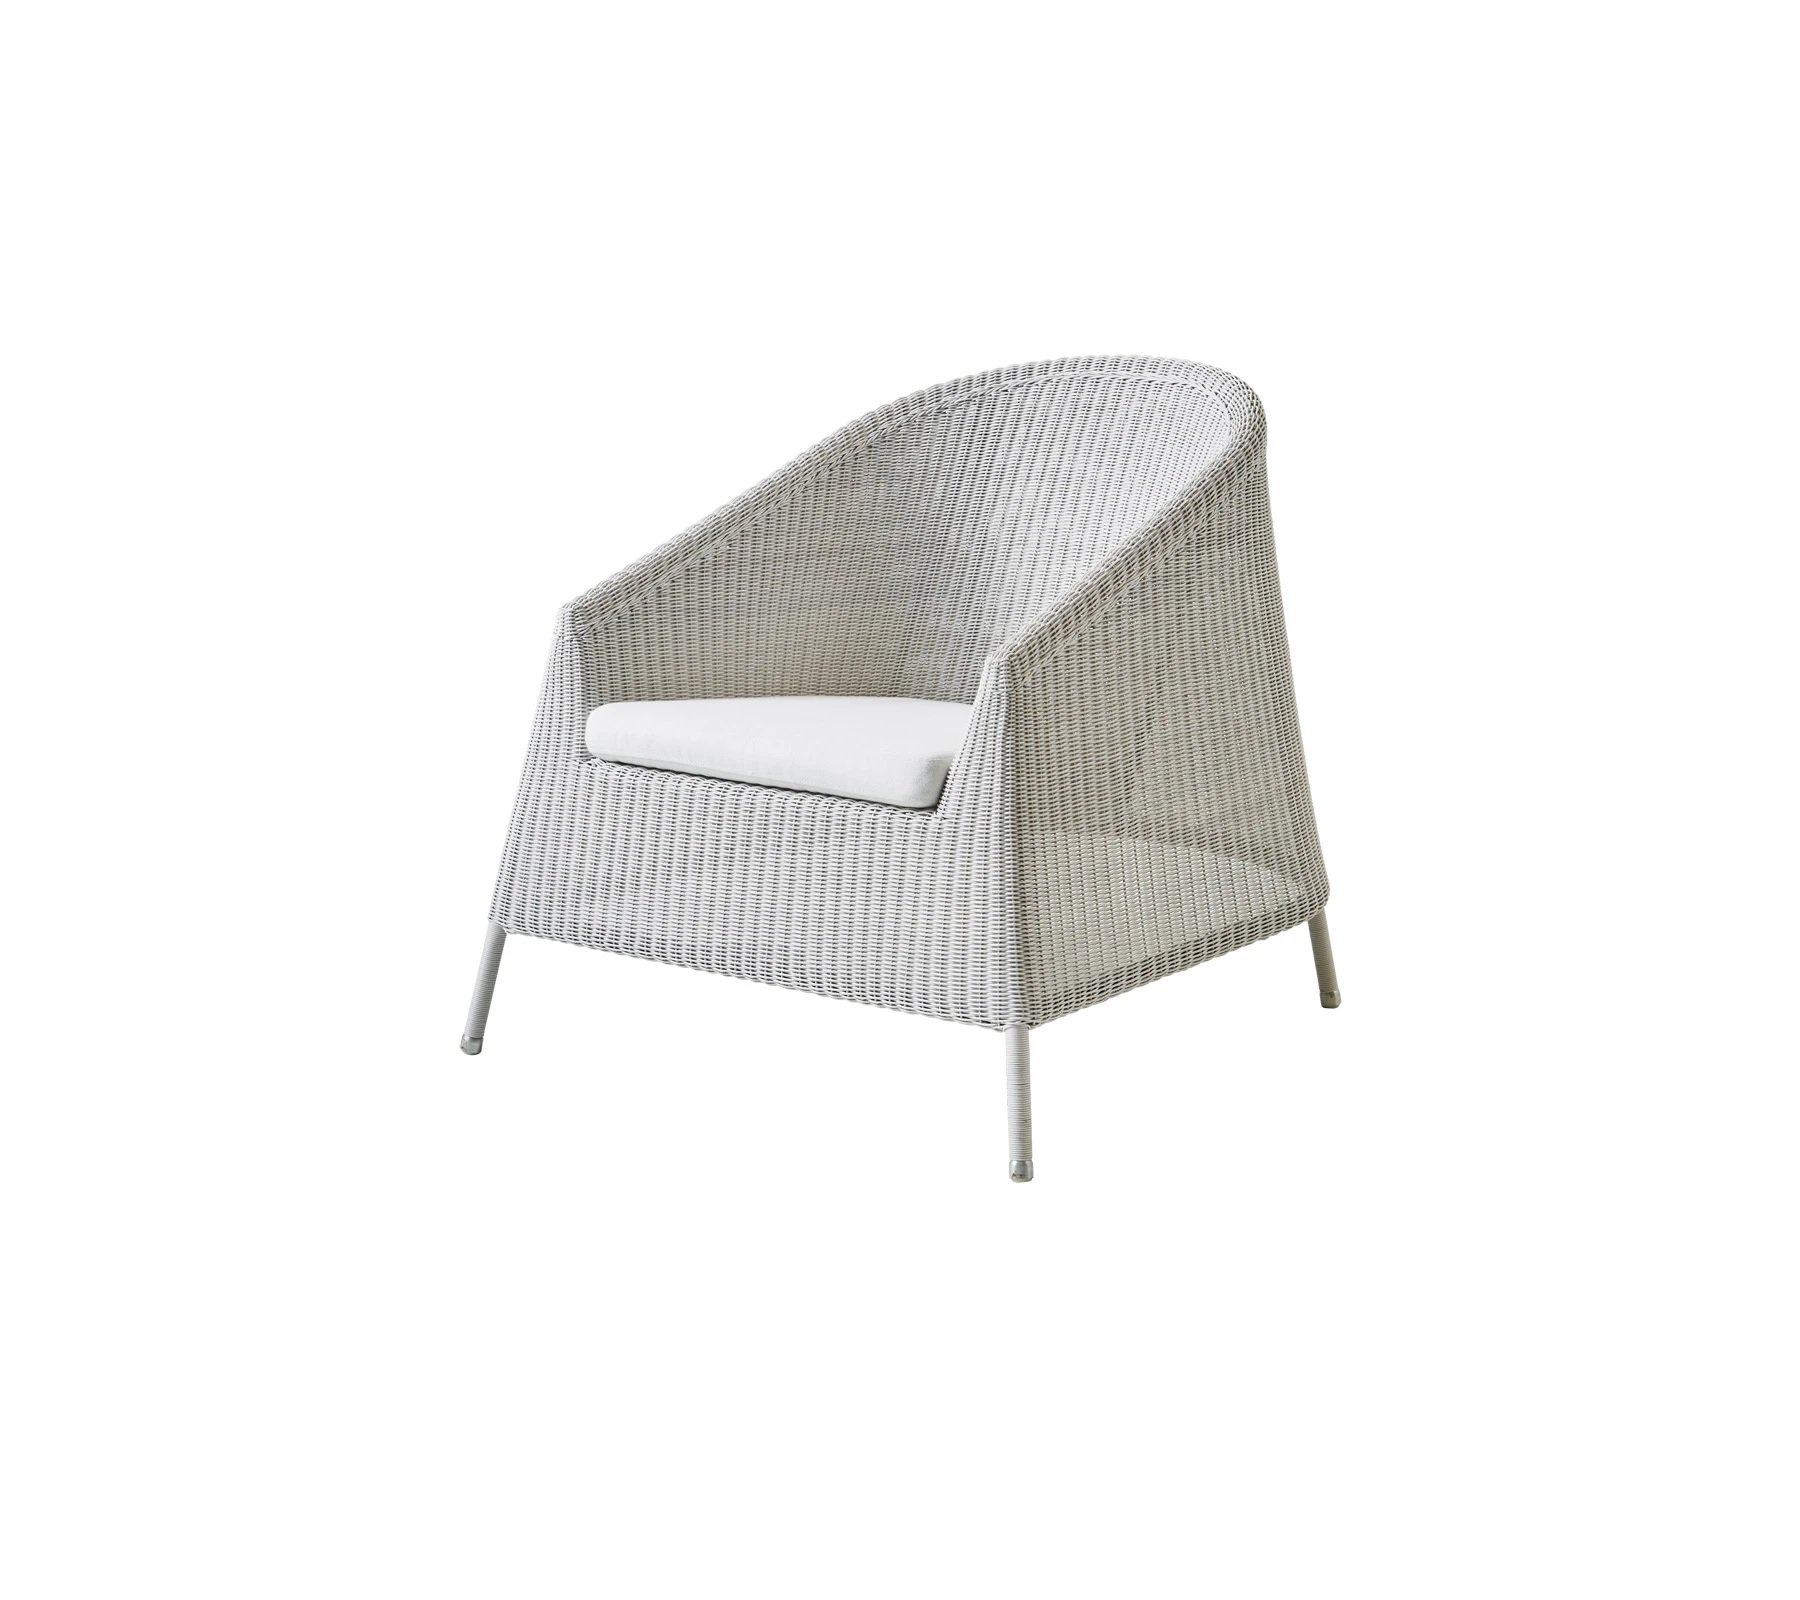 Cane-line Kingston Lounge Chair | Wooden | Outdoor-Patio Furniture ...